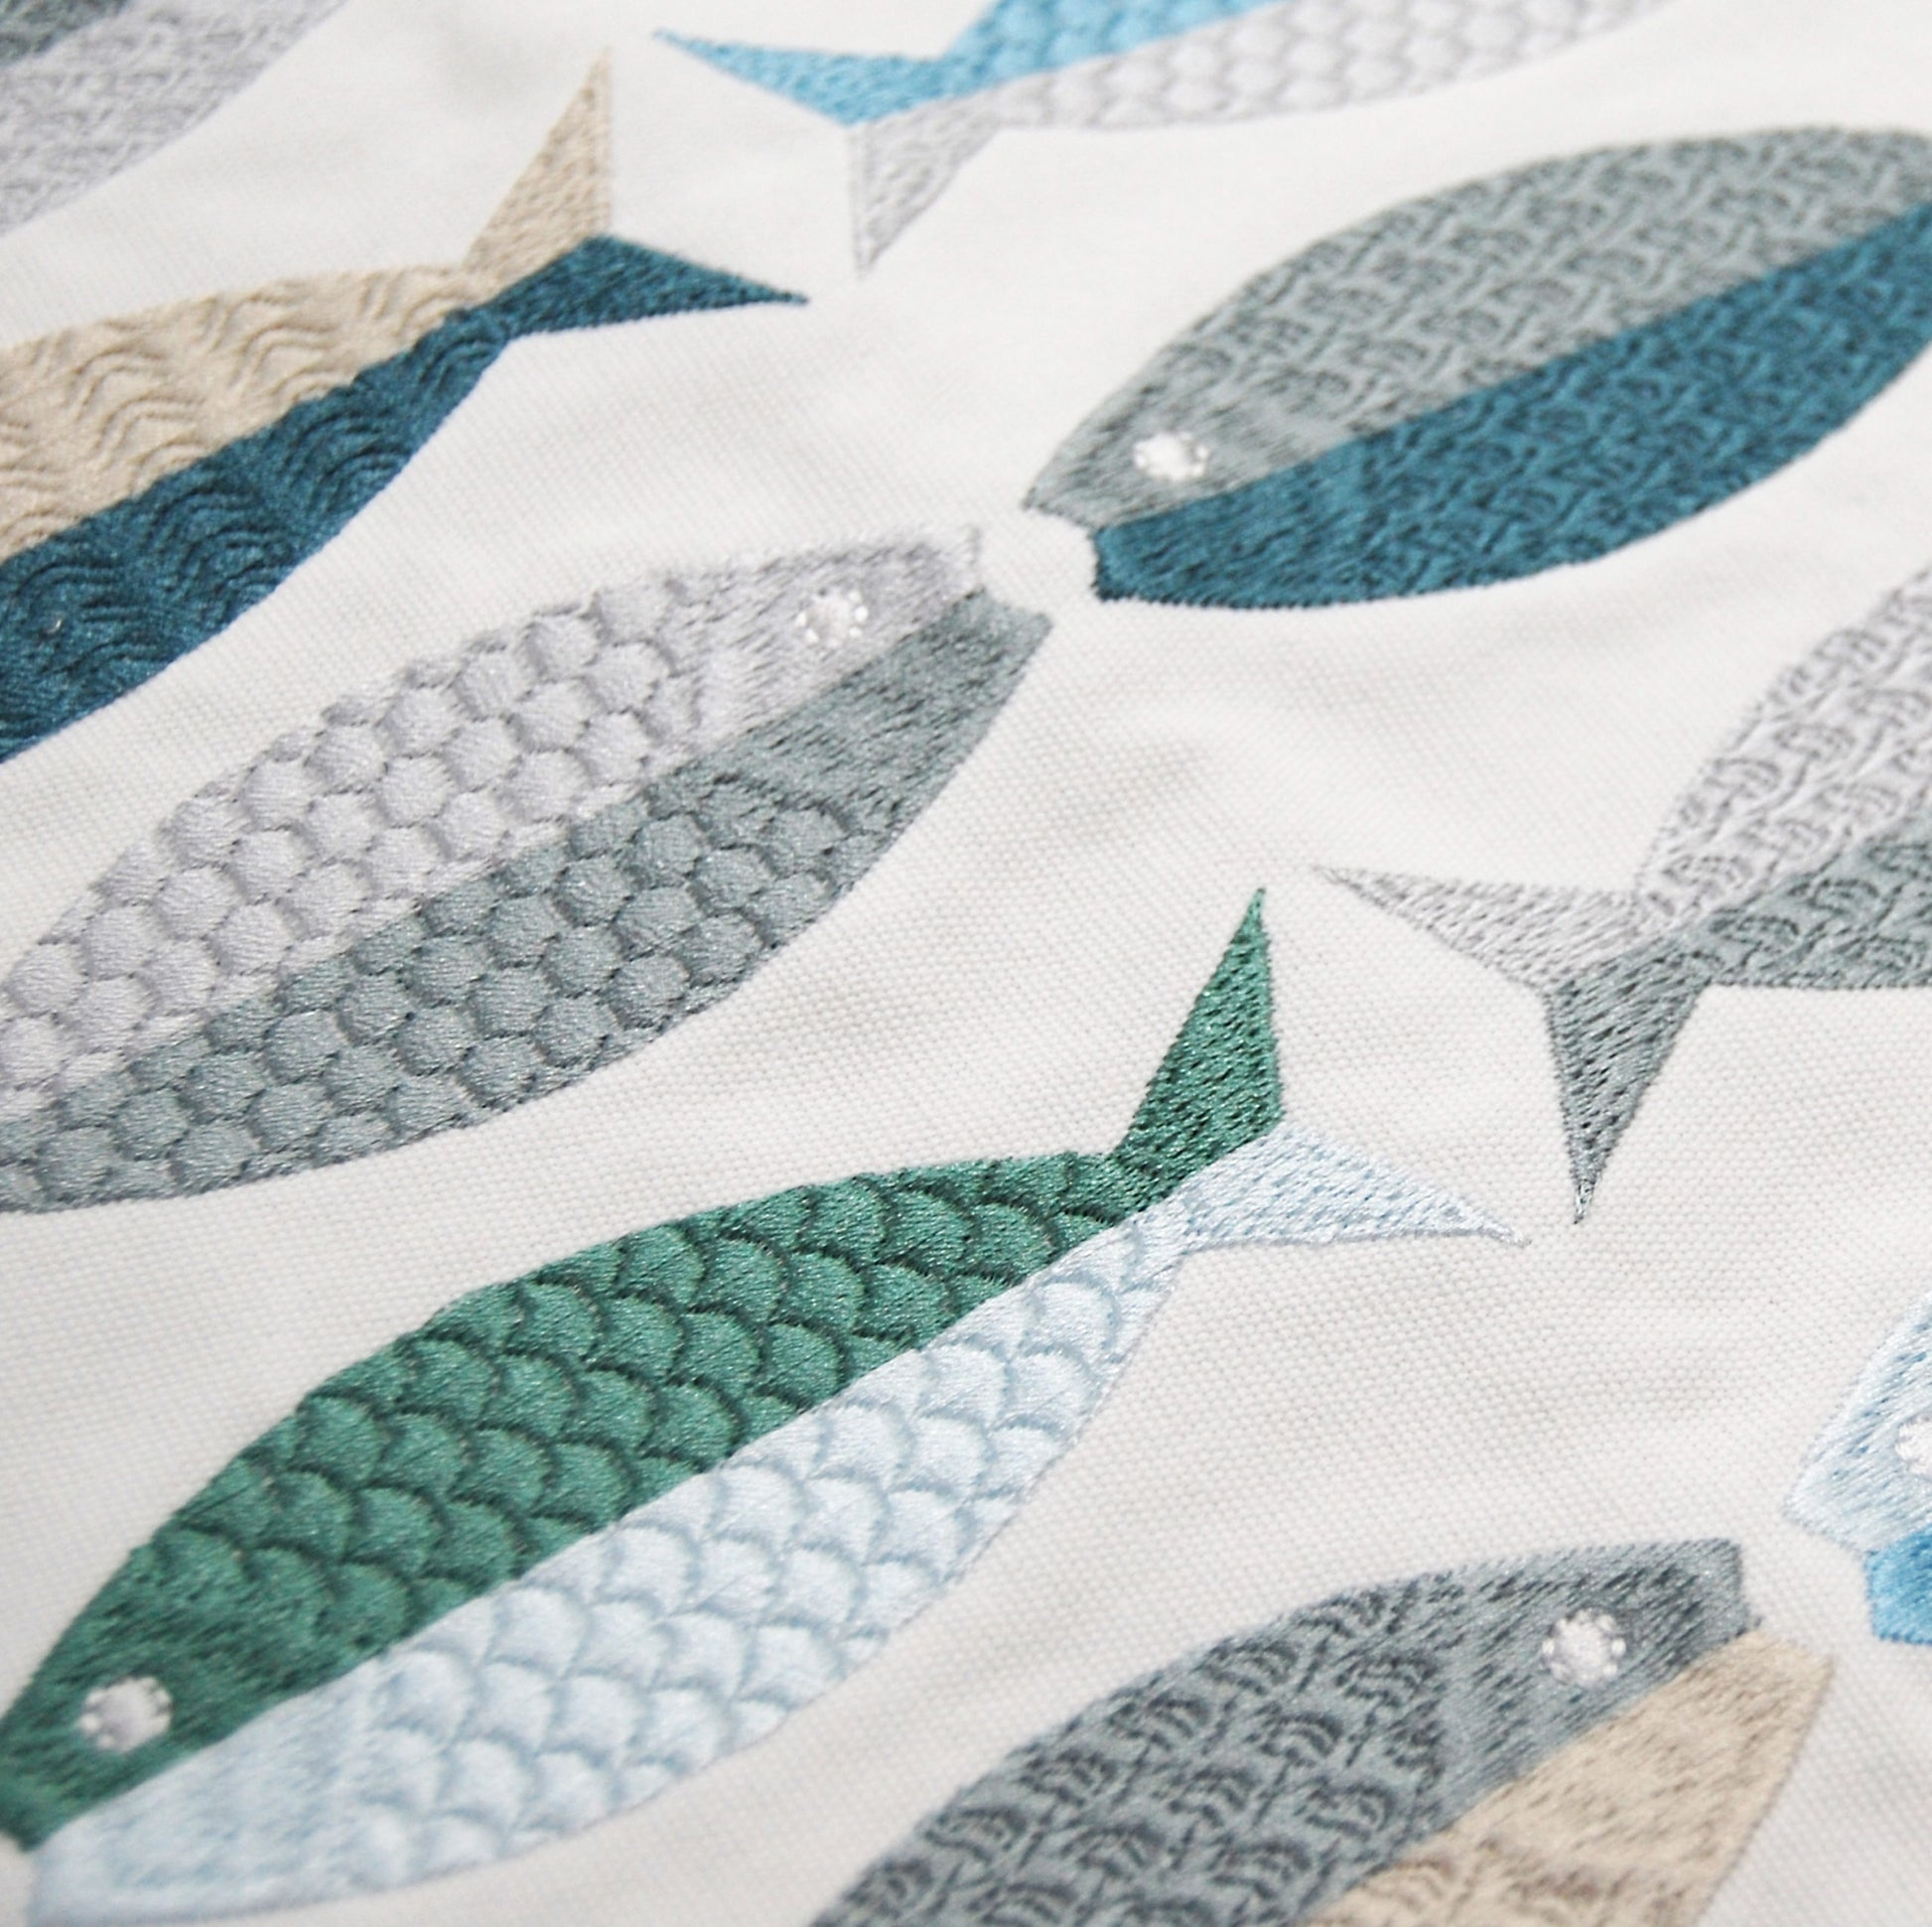 Detail shot of the Fish Pattern Lumbar pillow embroidery.